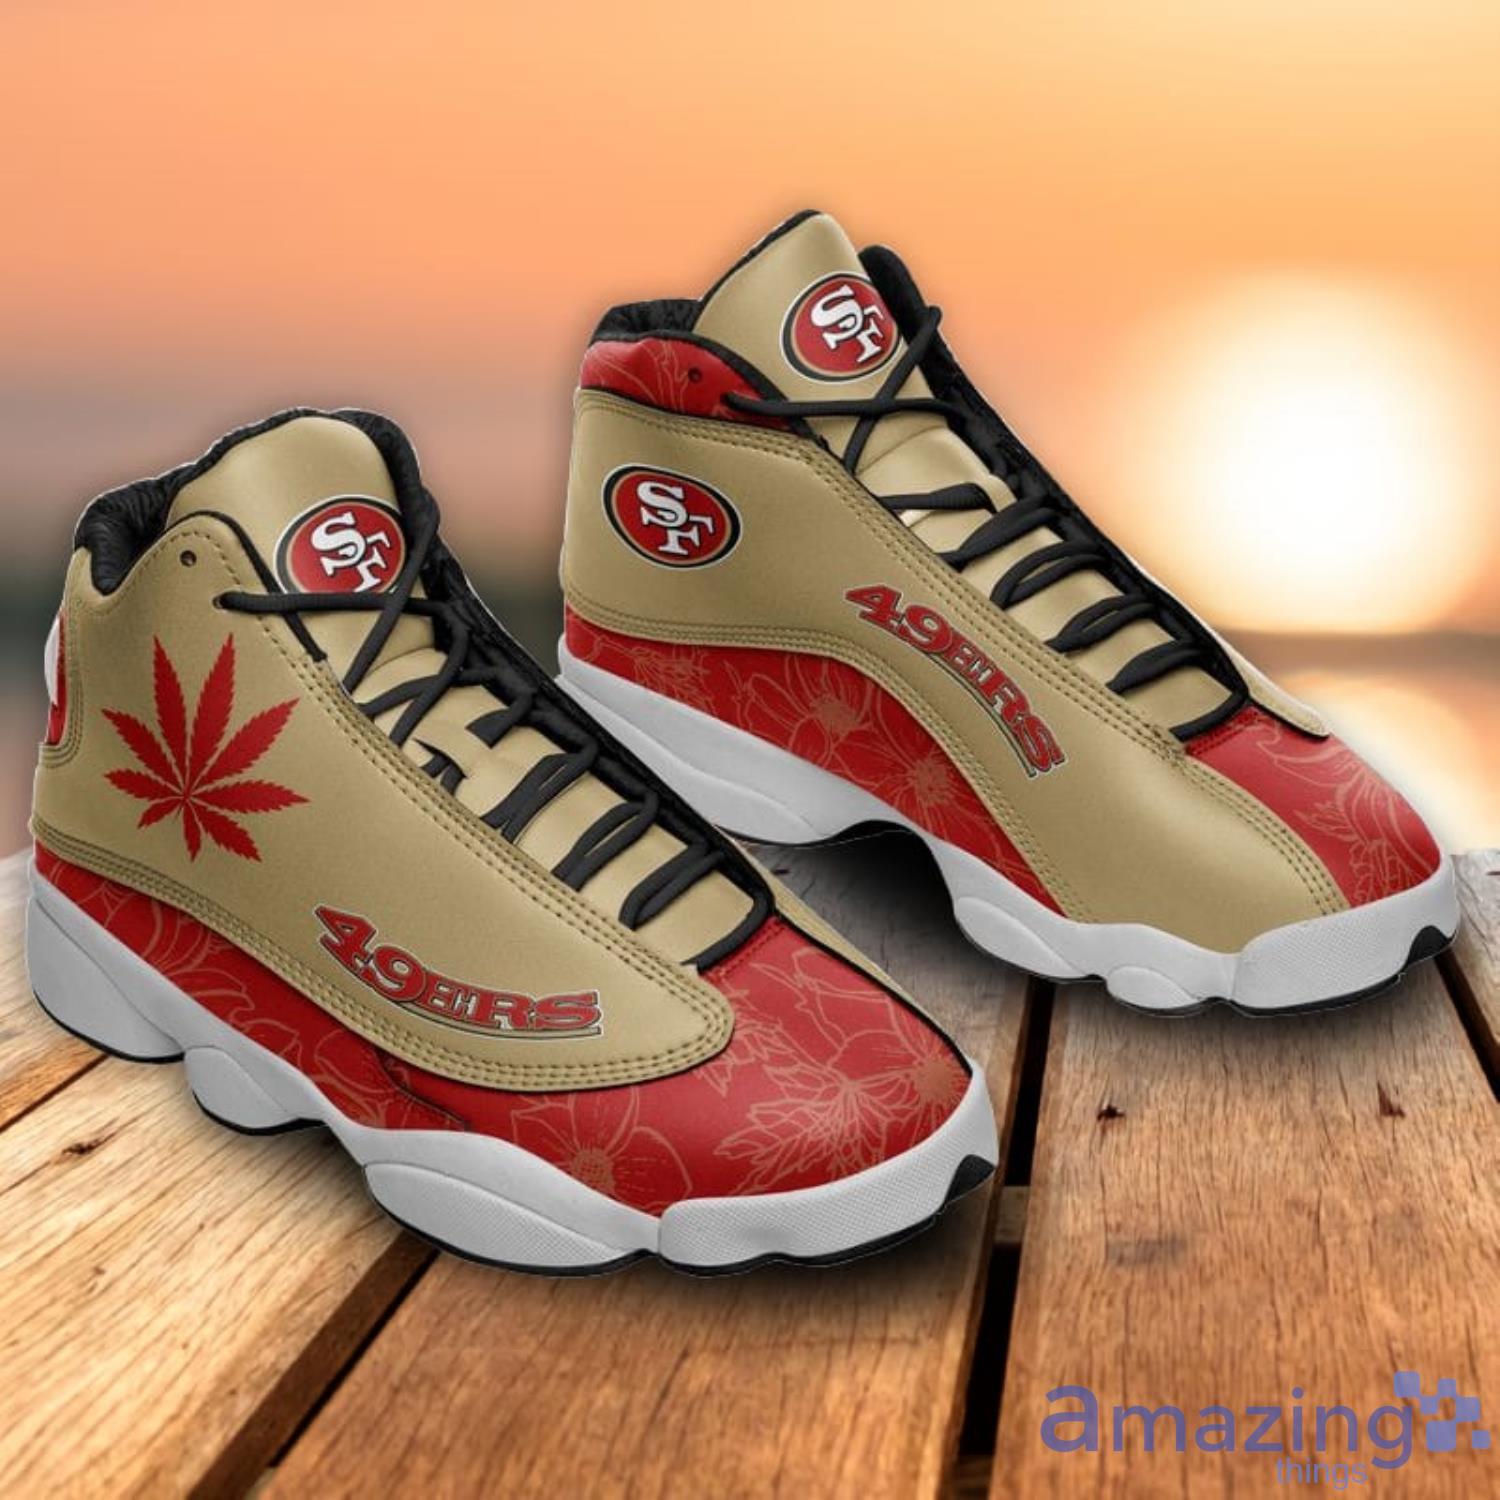 San Francisco 49ers Weed Air Jordan 13 Shoes For Fans